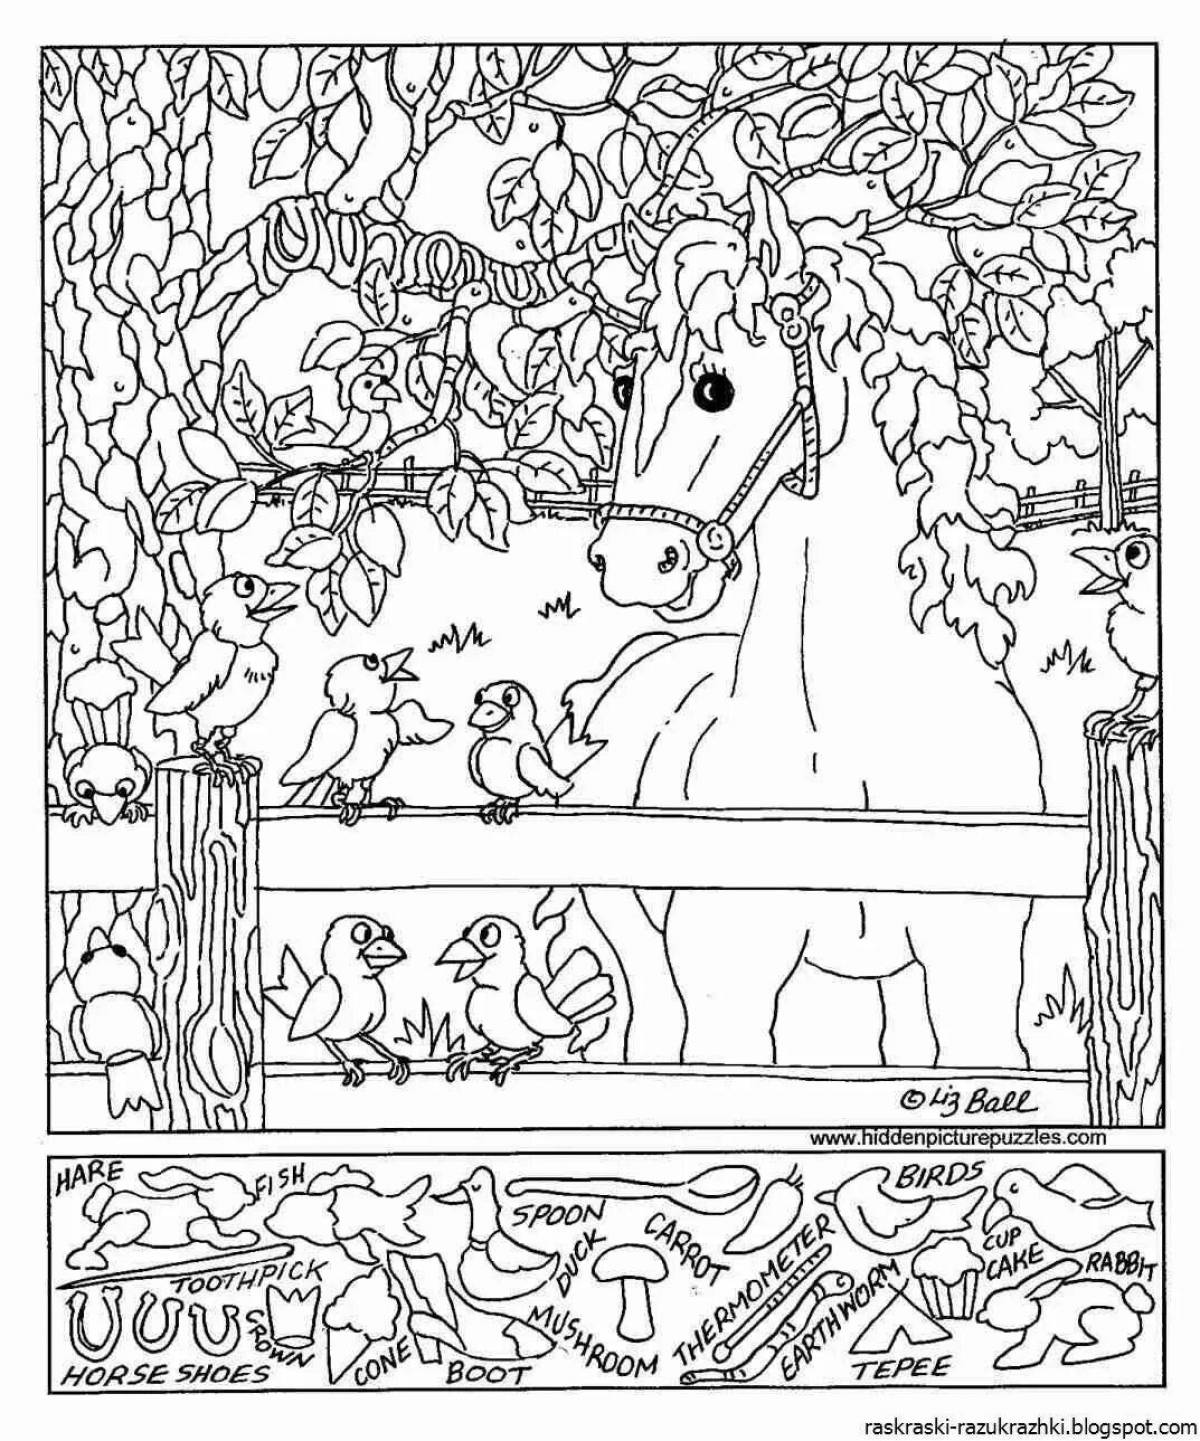 Delightful coloring book where to find